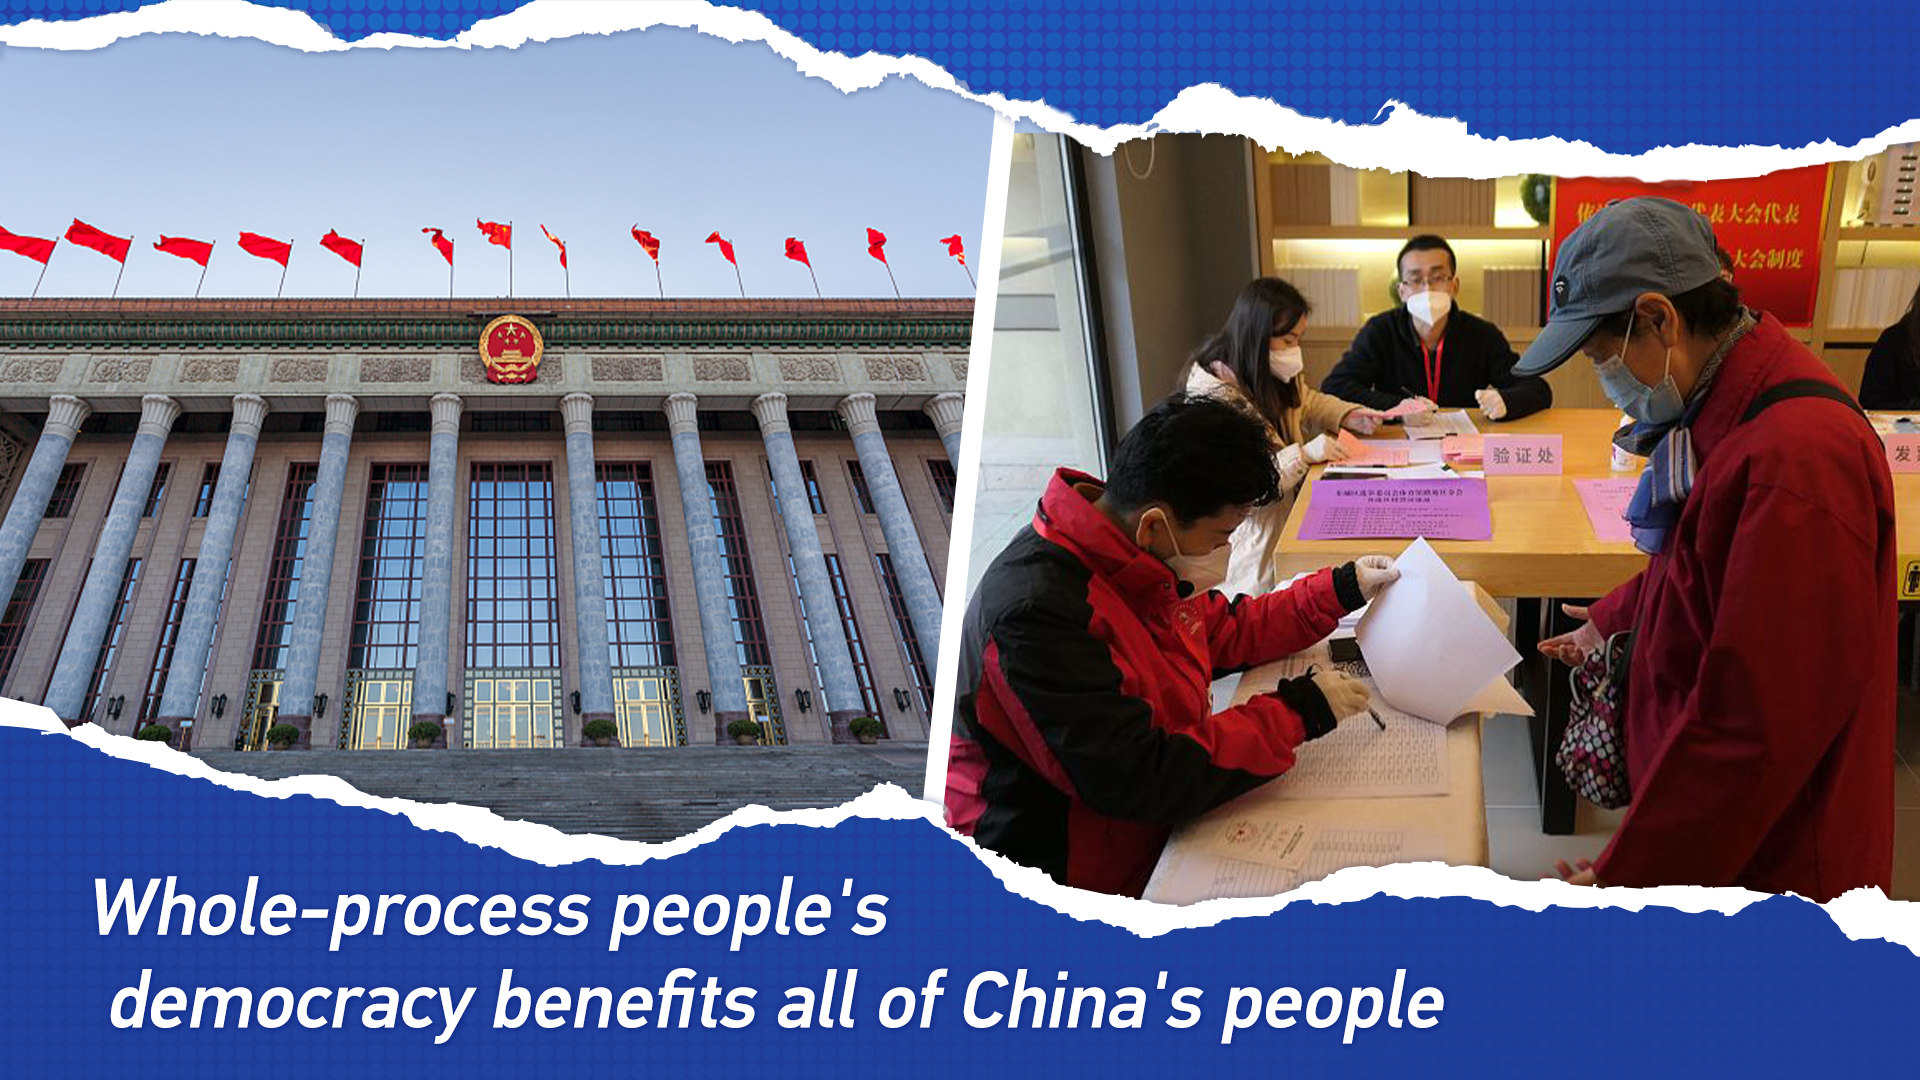 Whole-process people's democracy benefits all of China's people